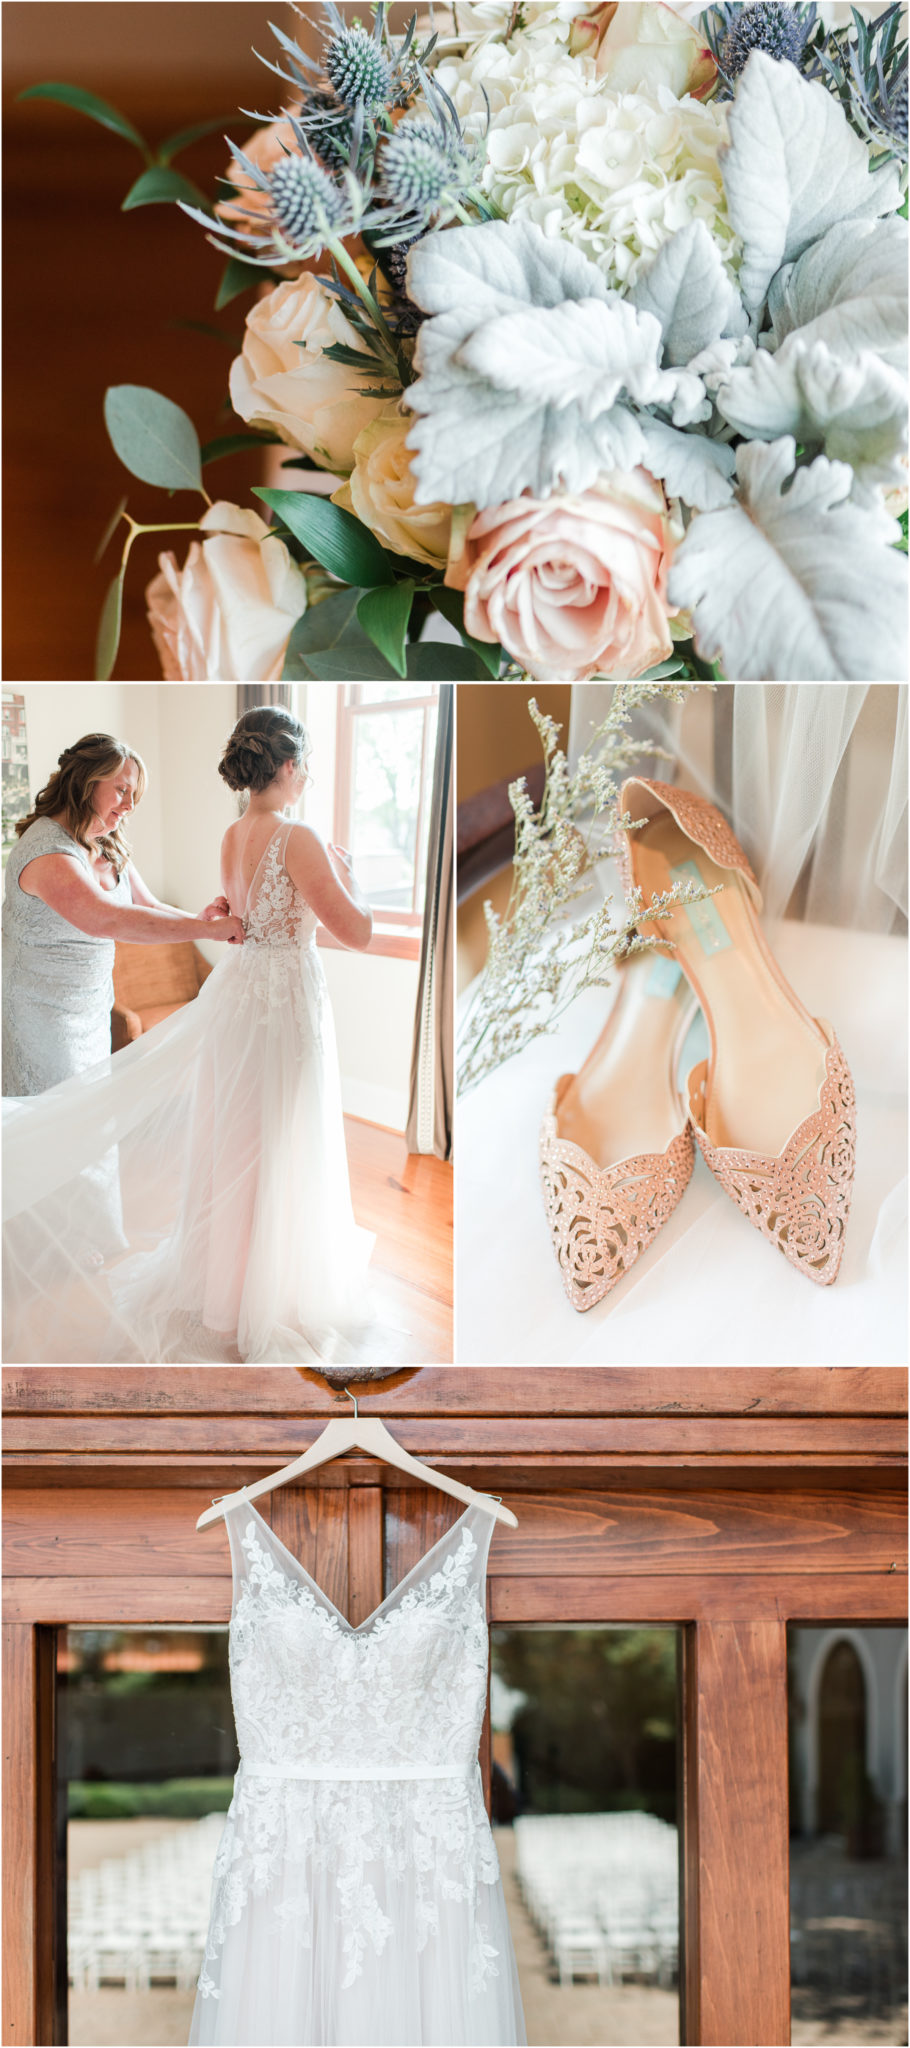 Elegant Carriage House Wedding at the Bleckley Inn Anderson South Carolina